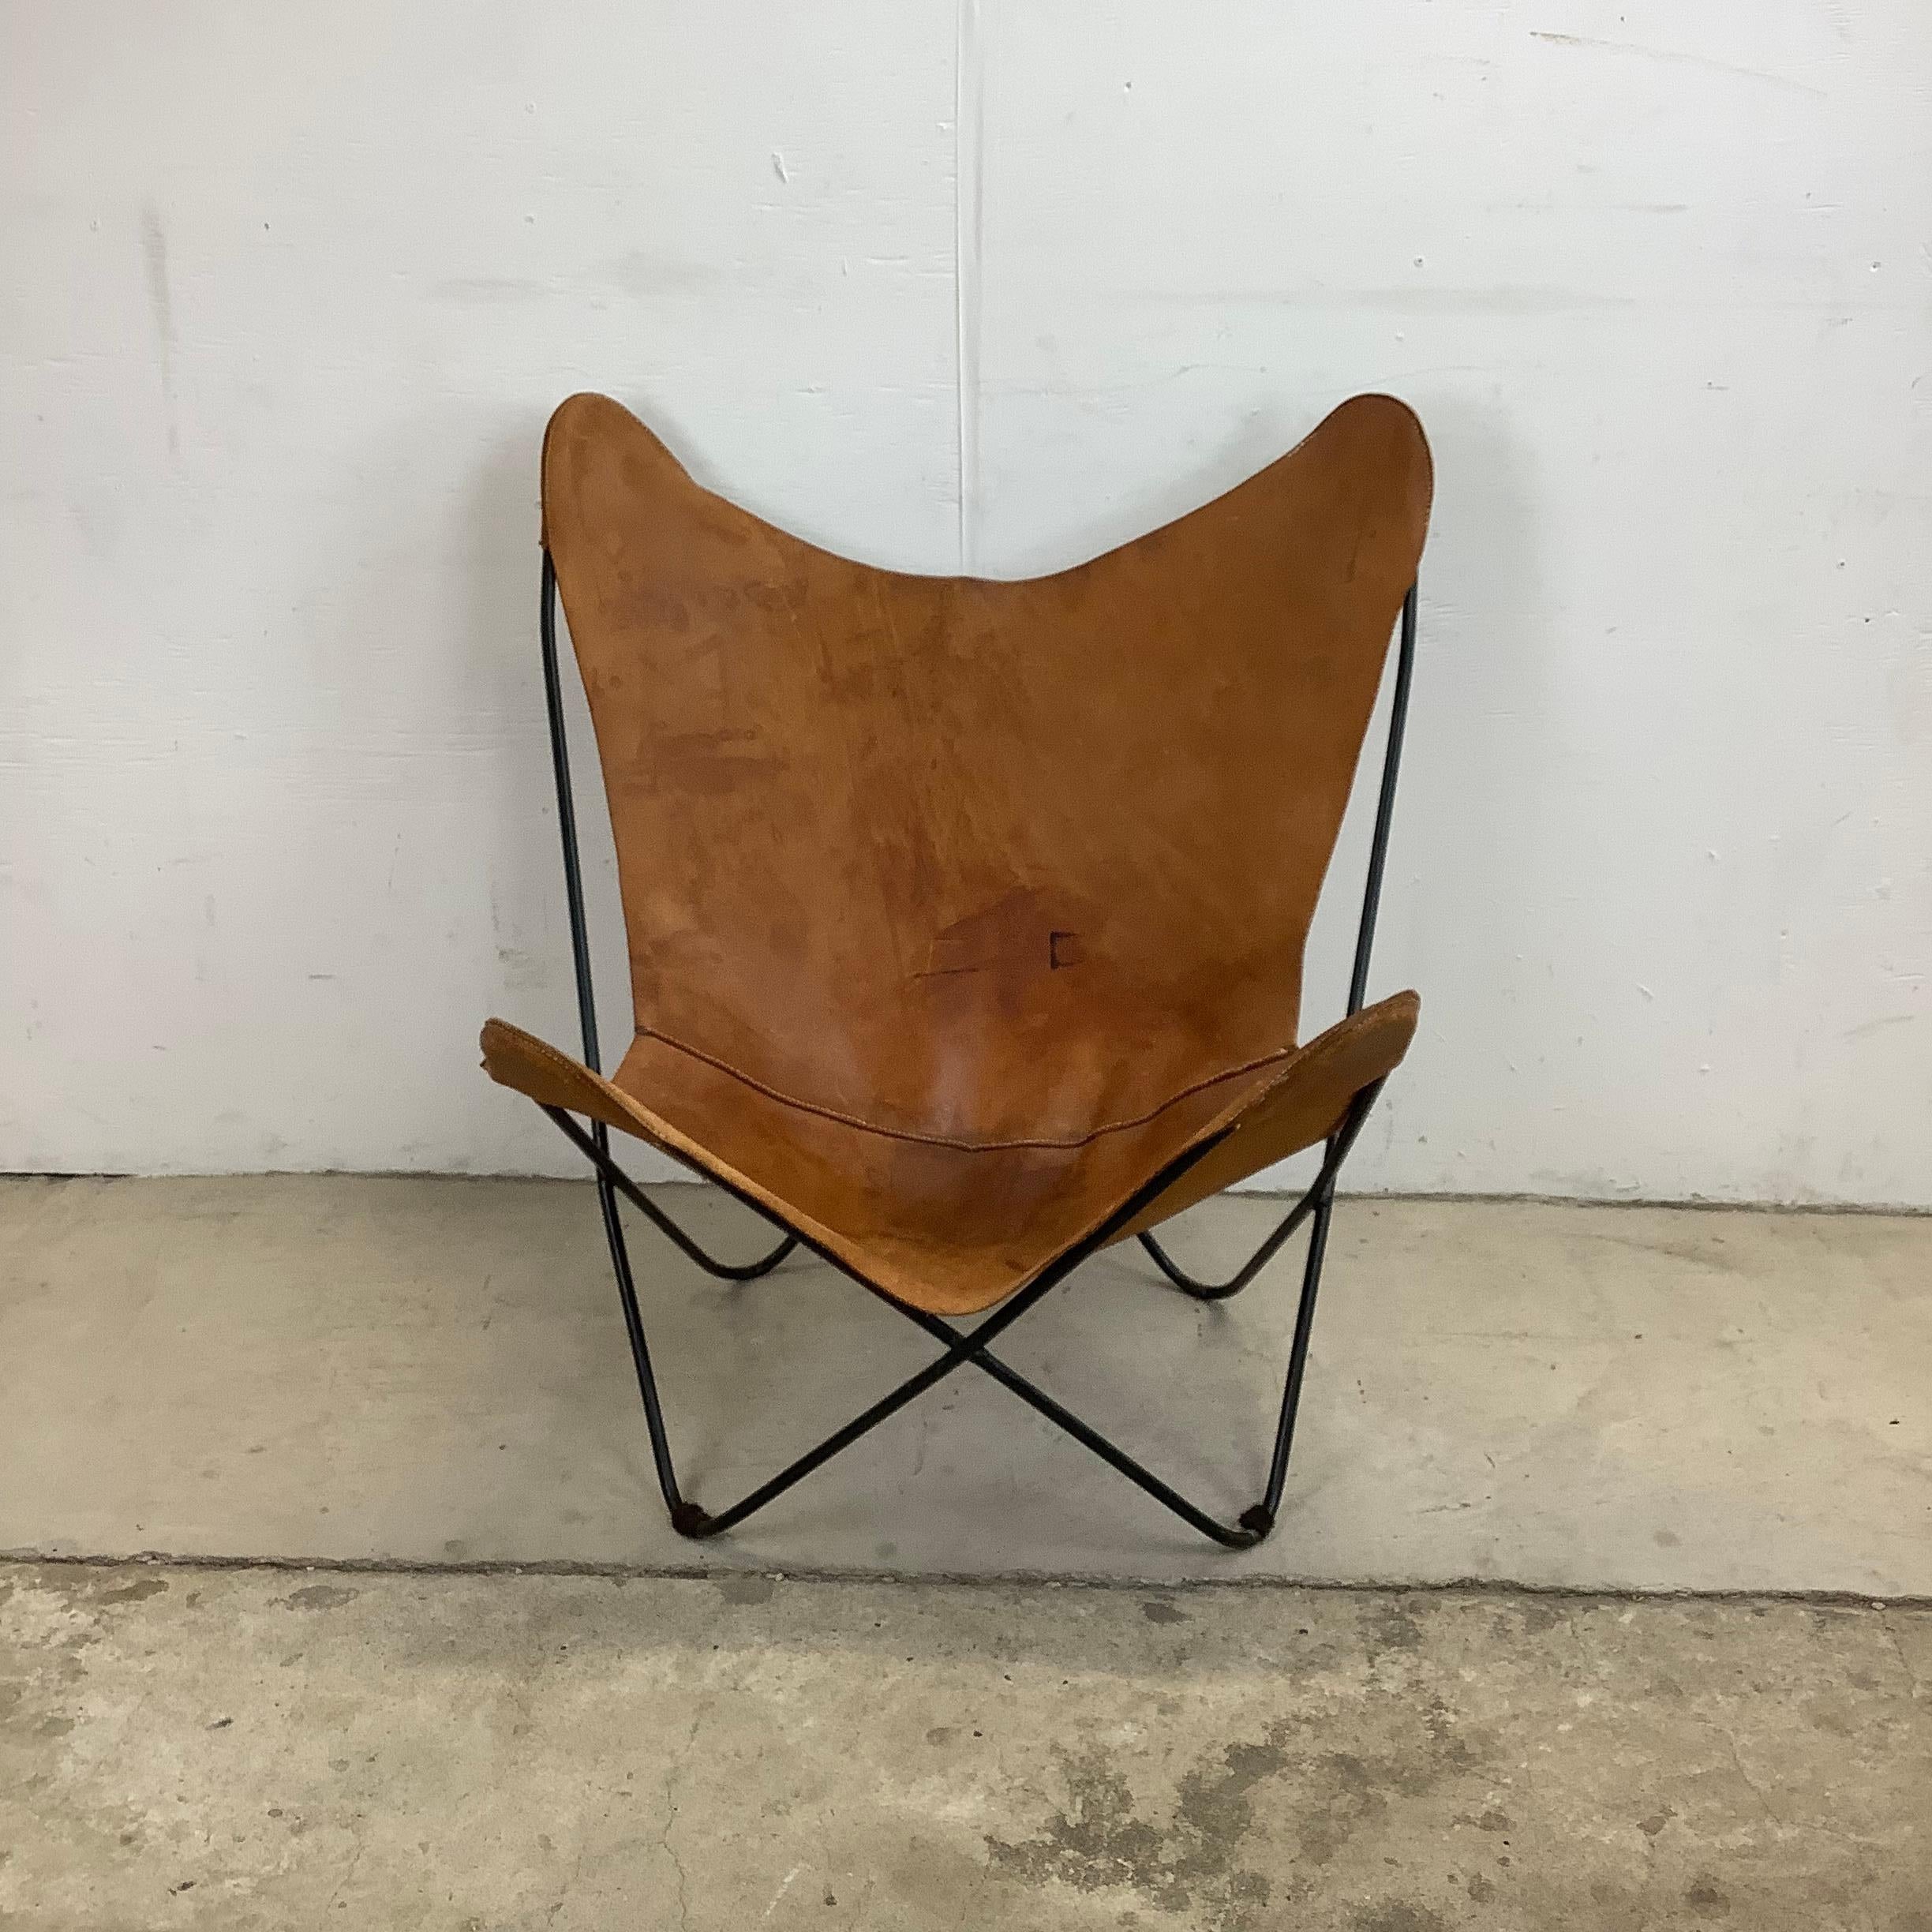 This mid-century period butterfly side chair features a sturdy iron BKF frame slung with patinated leather seat. The iconic comfort and minimalist modern design of this sought after side chair have ensured it to be a favorite for home or business